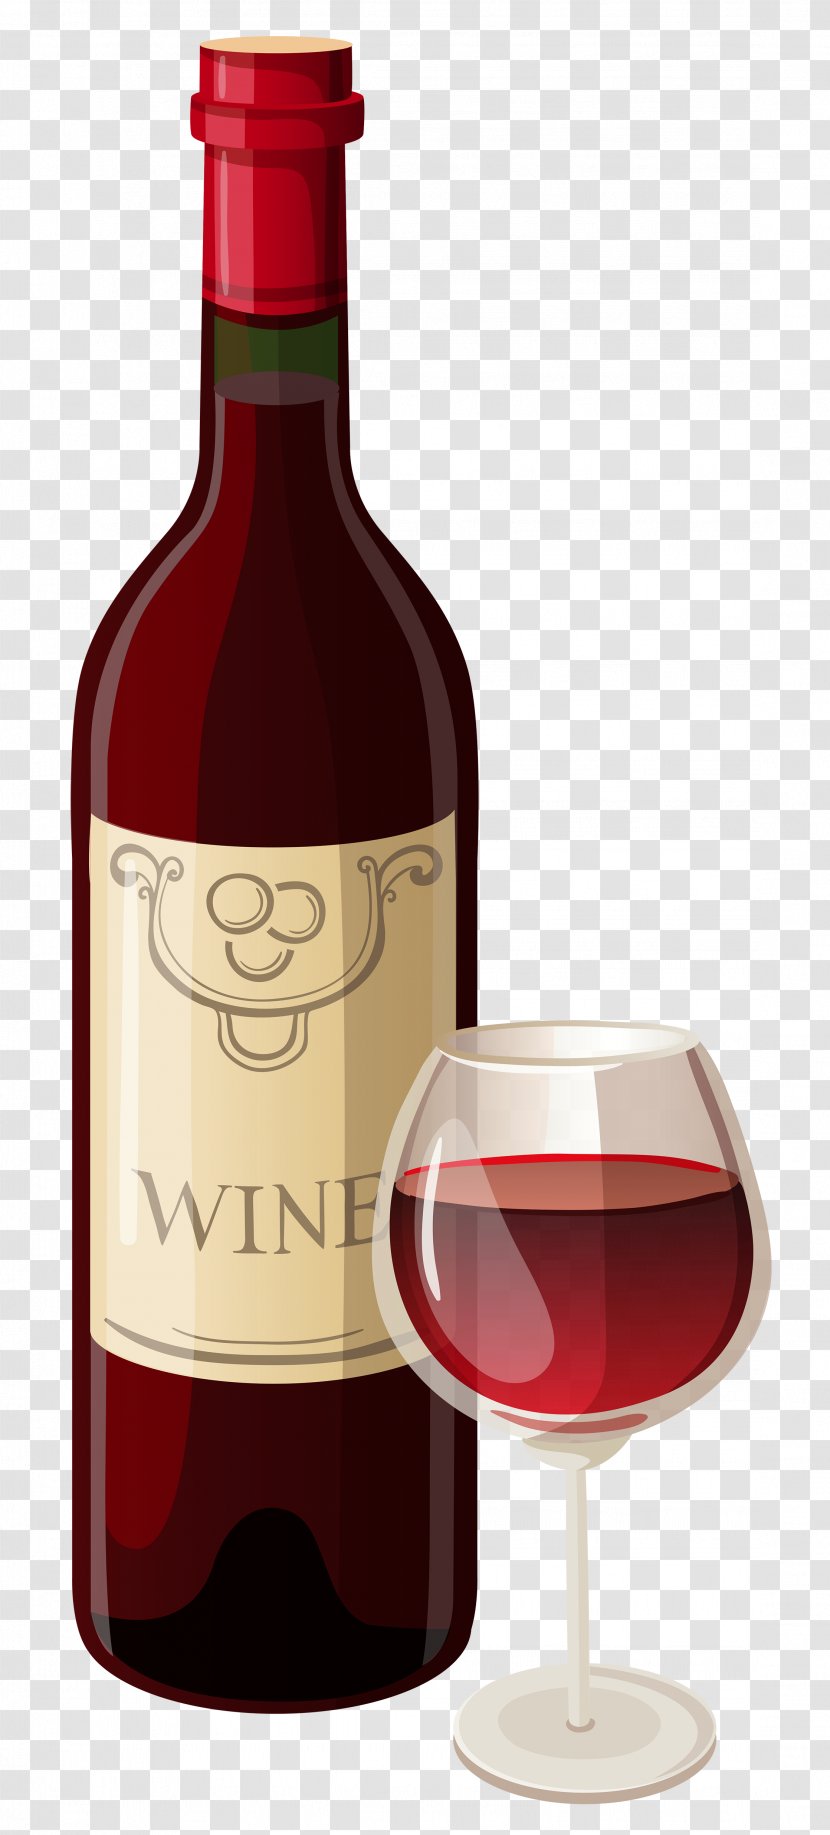 Red Wine Champagne Bottle Clip Art - Cocktail - And Glass Vector Clipart Transparent PNG